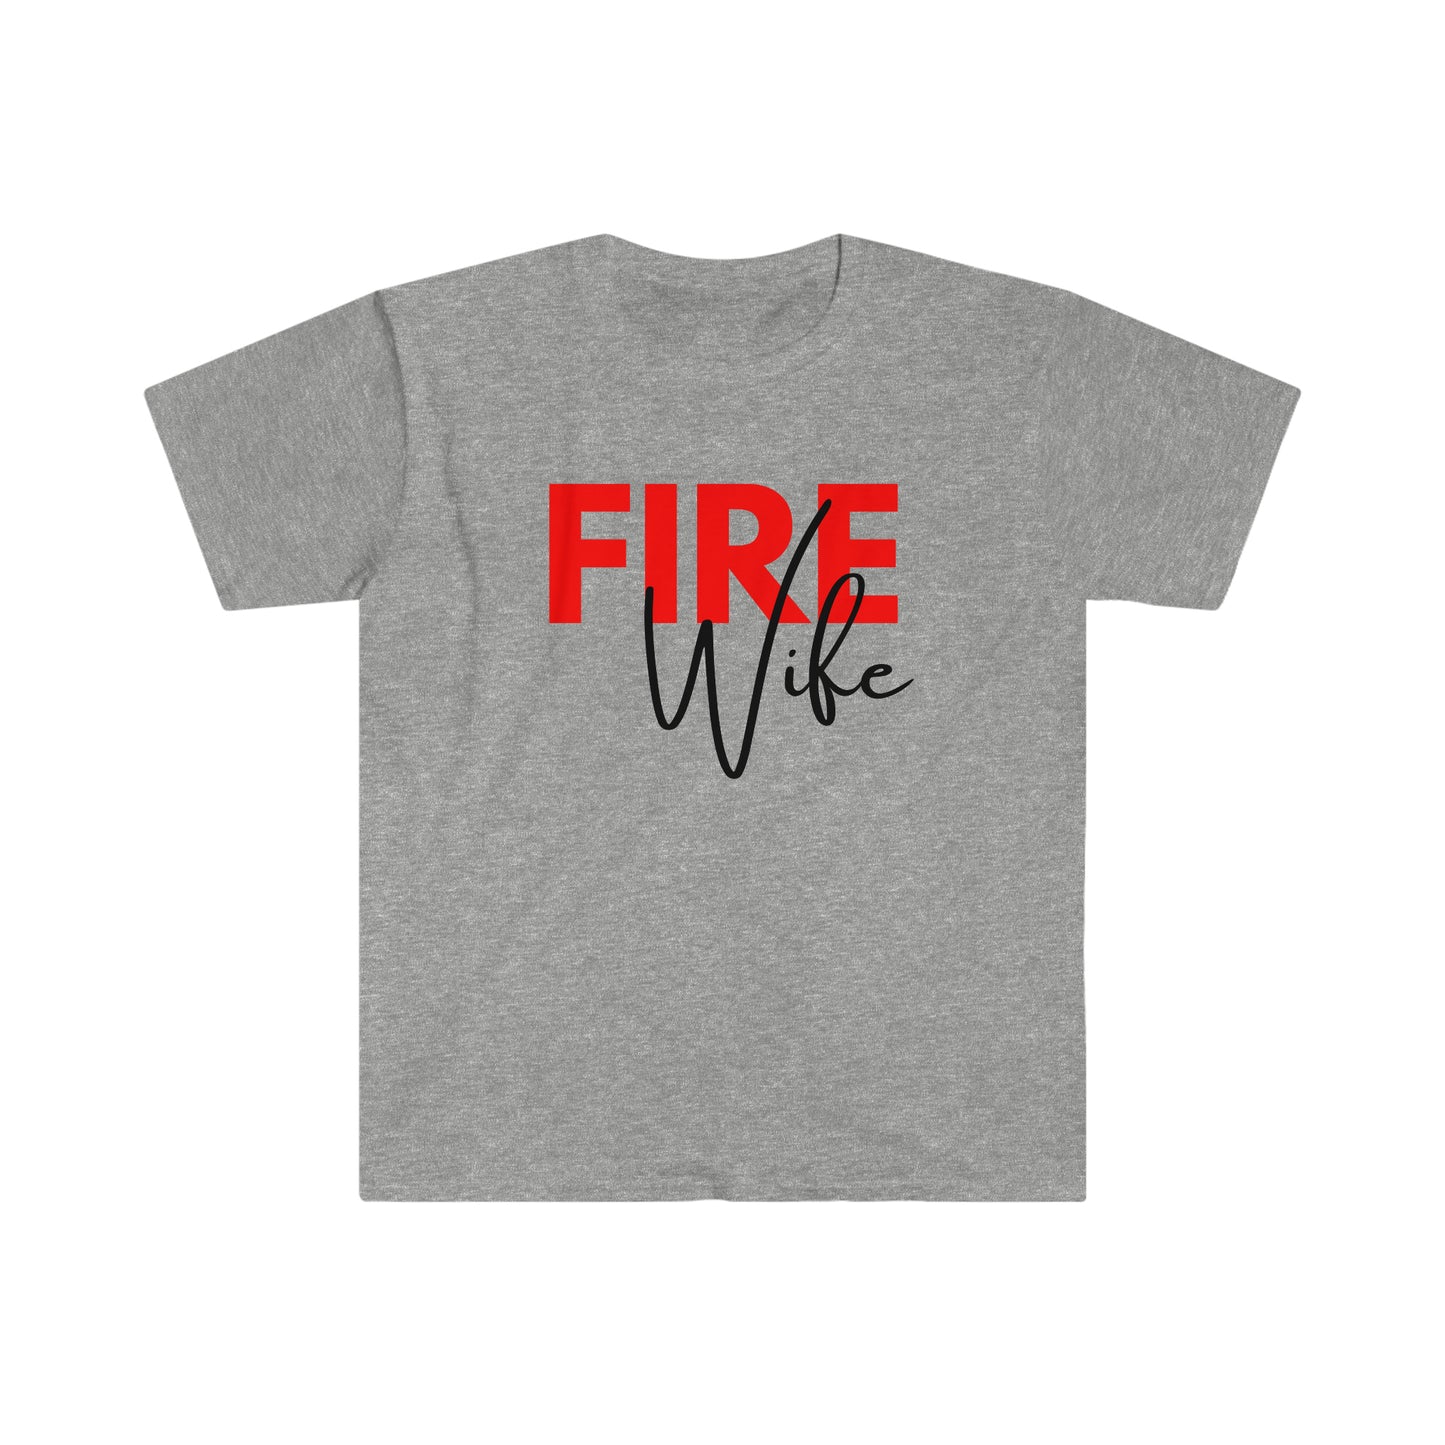 Fire Wife (Blk) - Softstyle T-Shirt